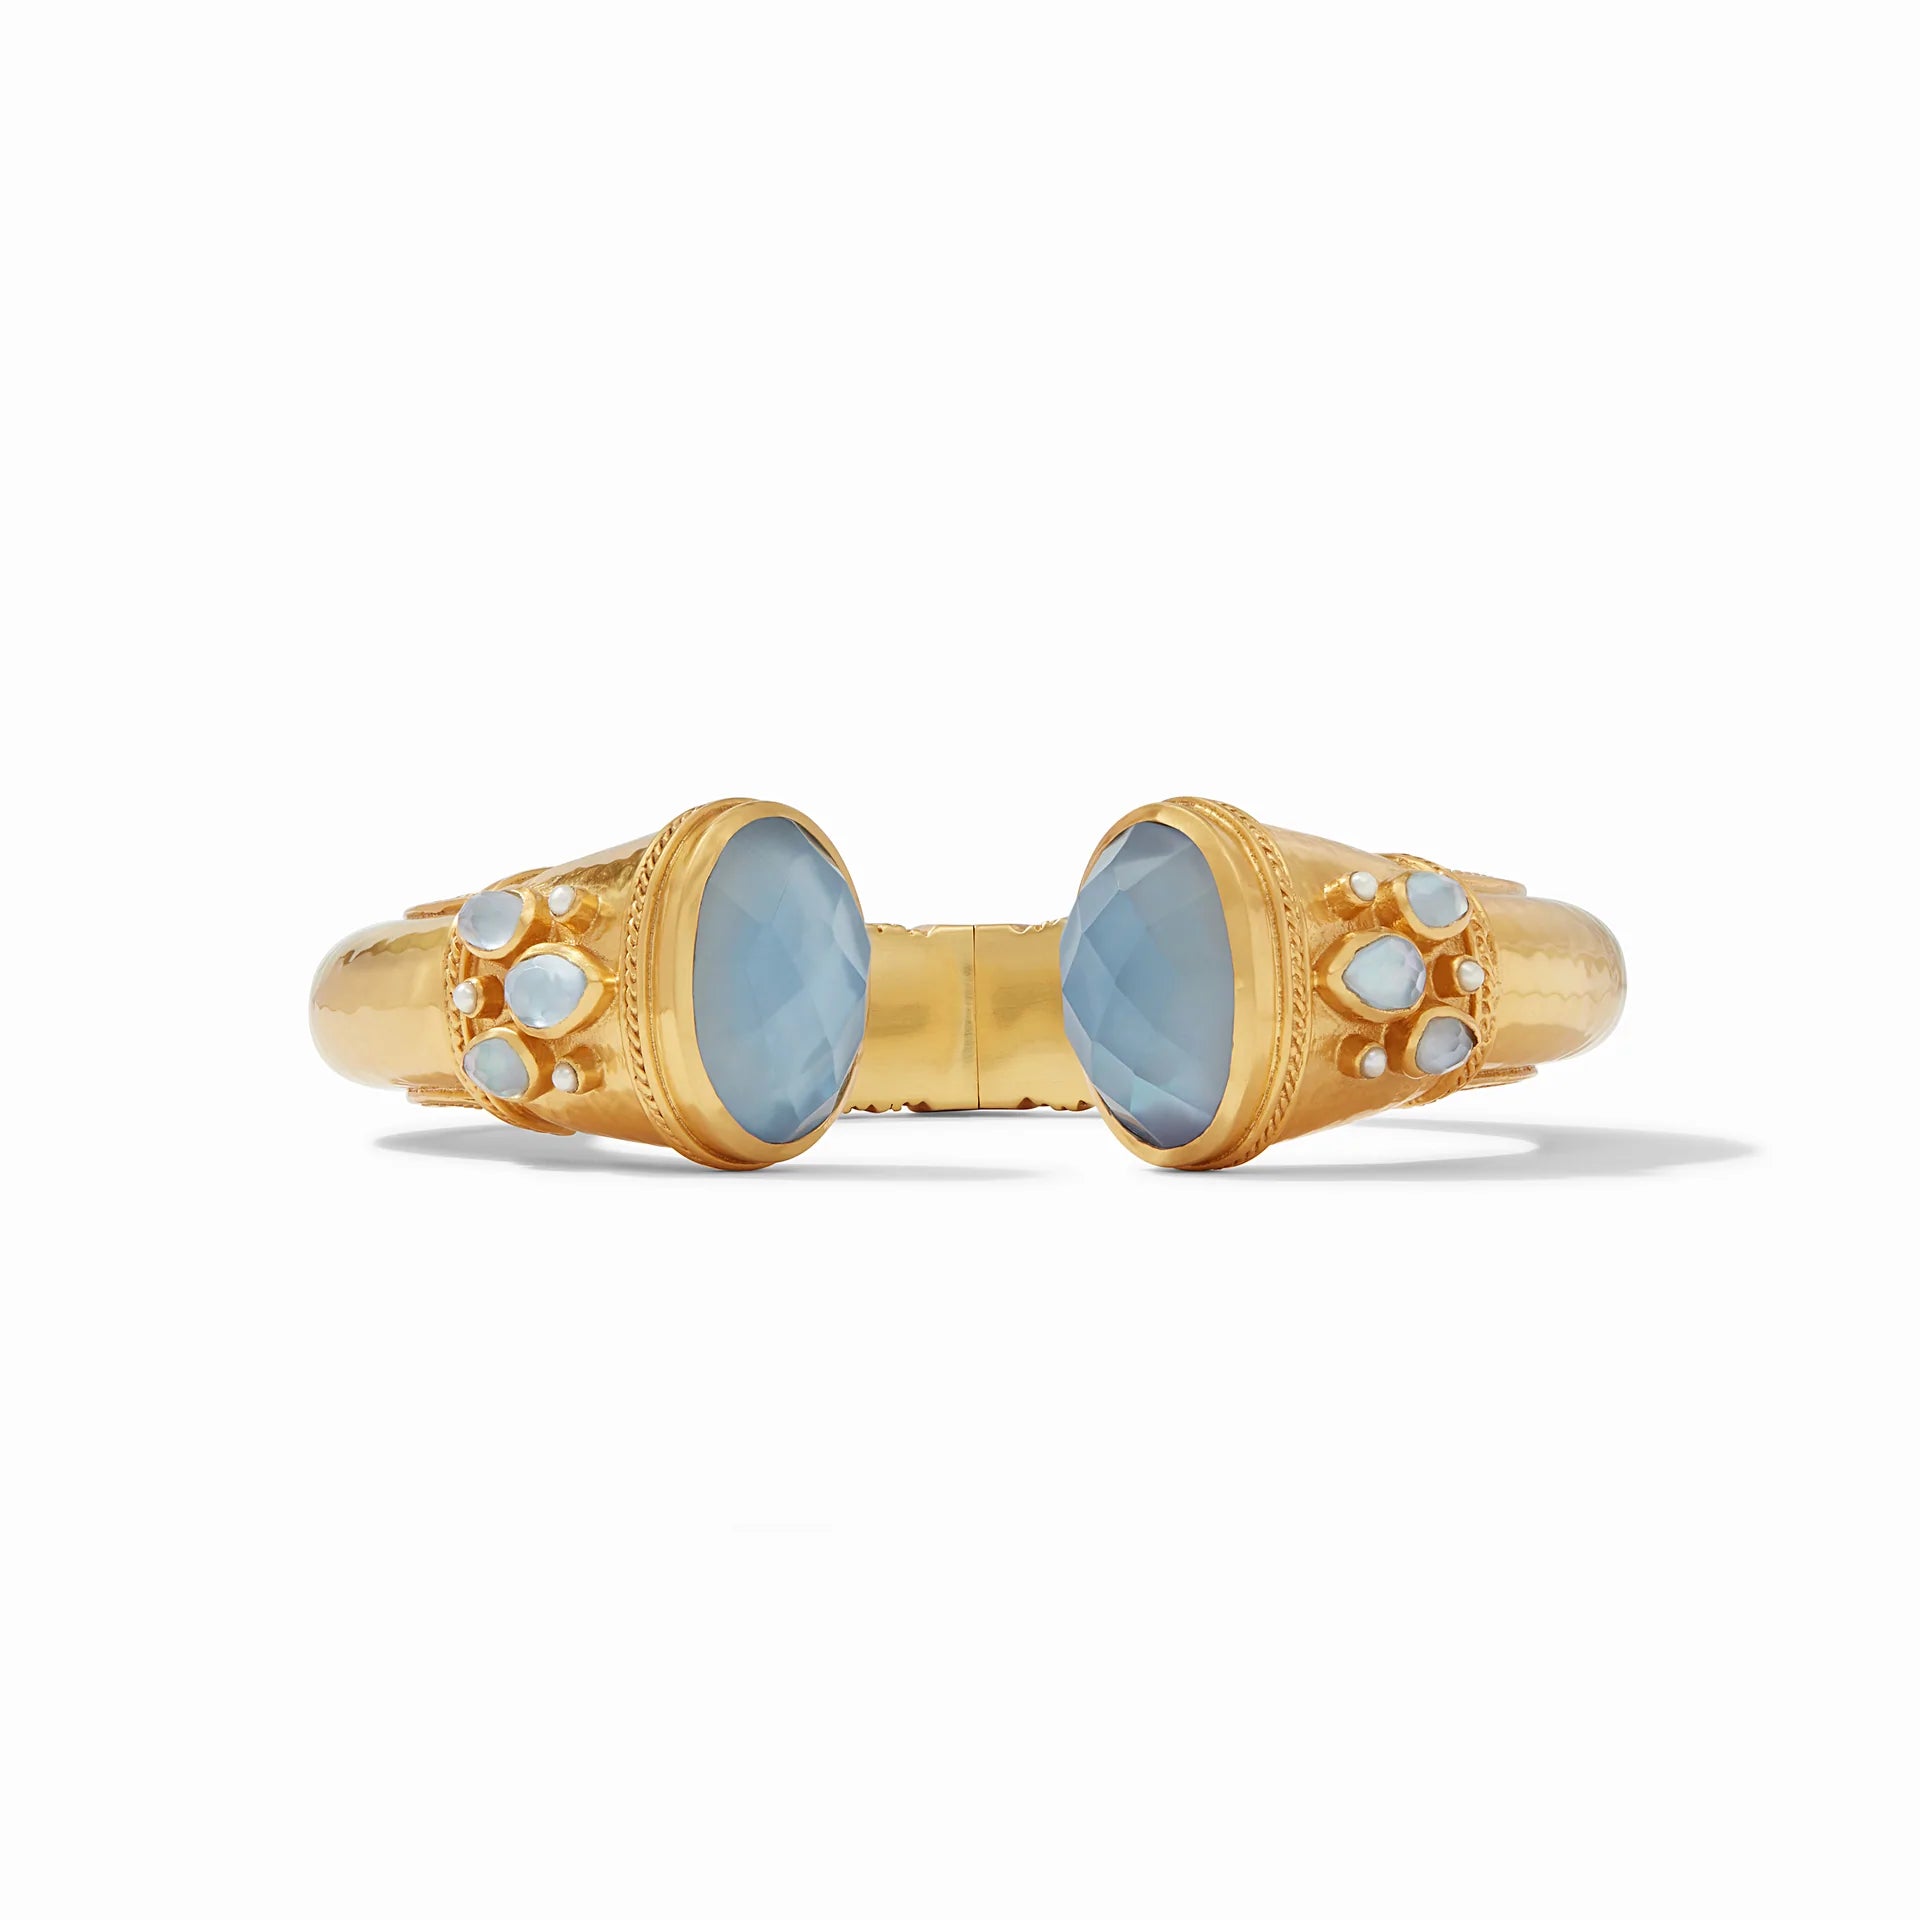 Cassis Cuff Bracelet | Iridescent Chalcedony Blue with Pearl Accents